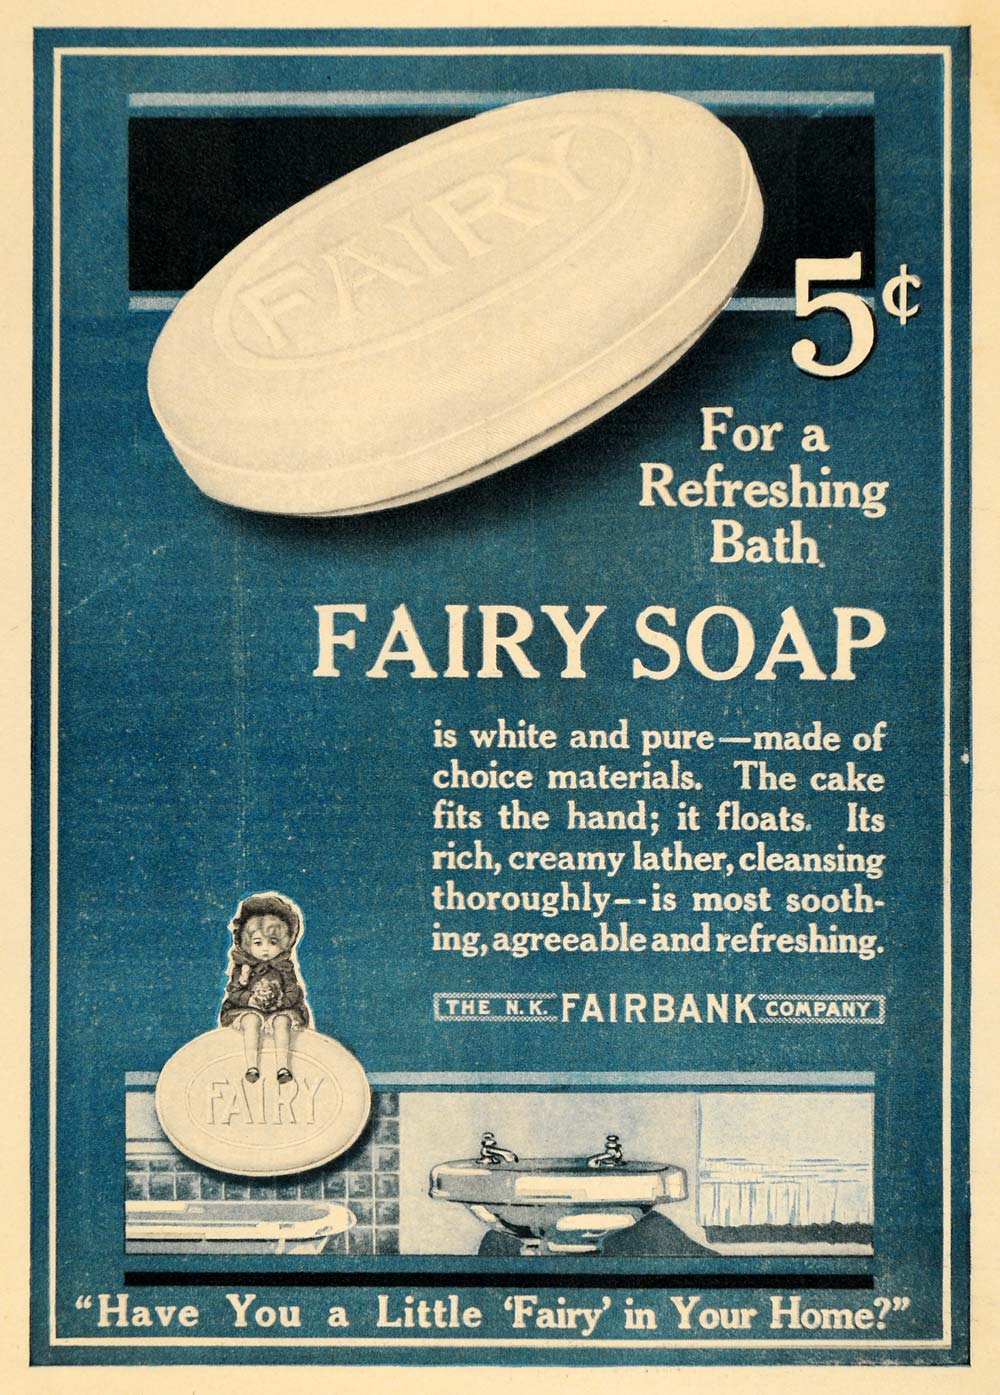 1915 Ad Fairy Soap Fairbank Hygiene Gold Dust Procter Personal Care Lather HM1